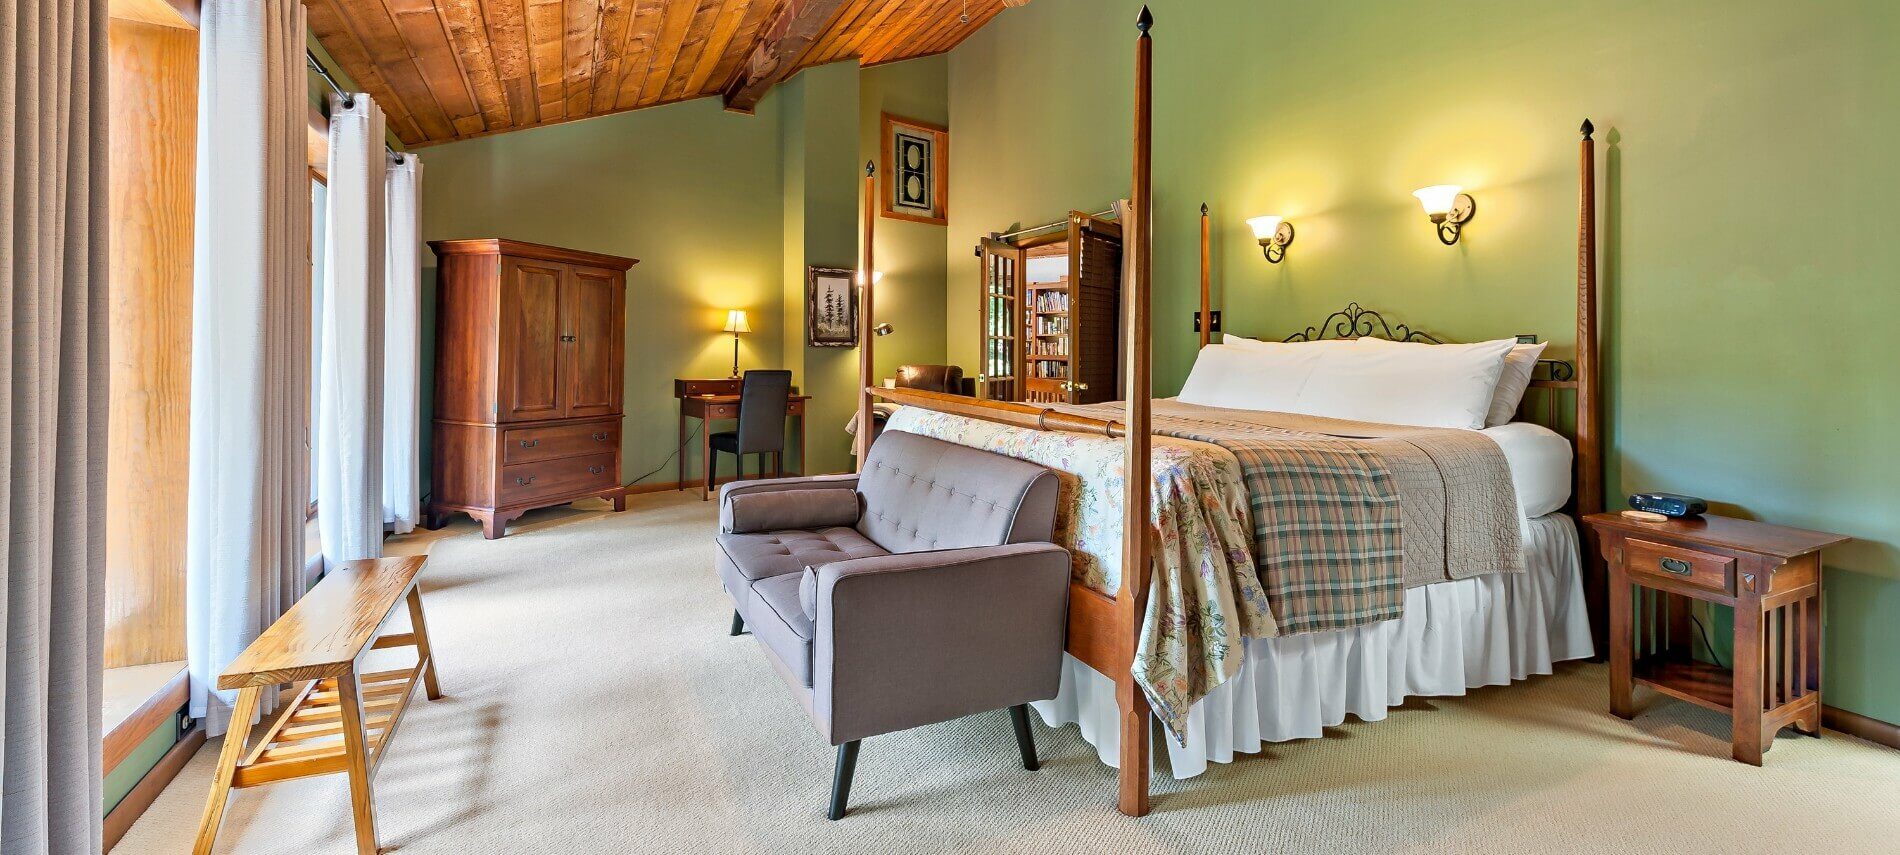 Large bedroom with vaulted cedar plank ceiling, and four poster bed facing wall of floor to ceiling windows